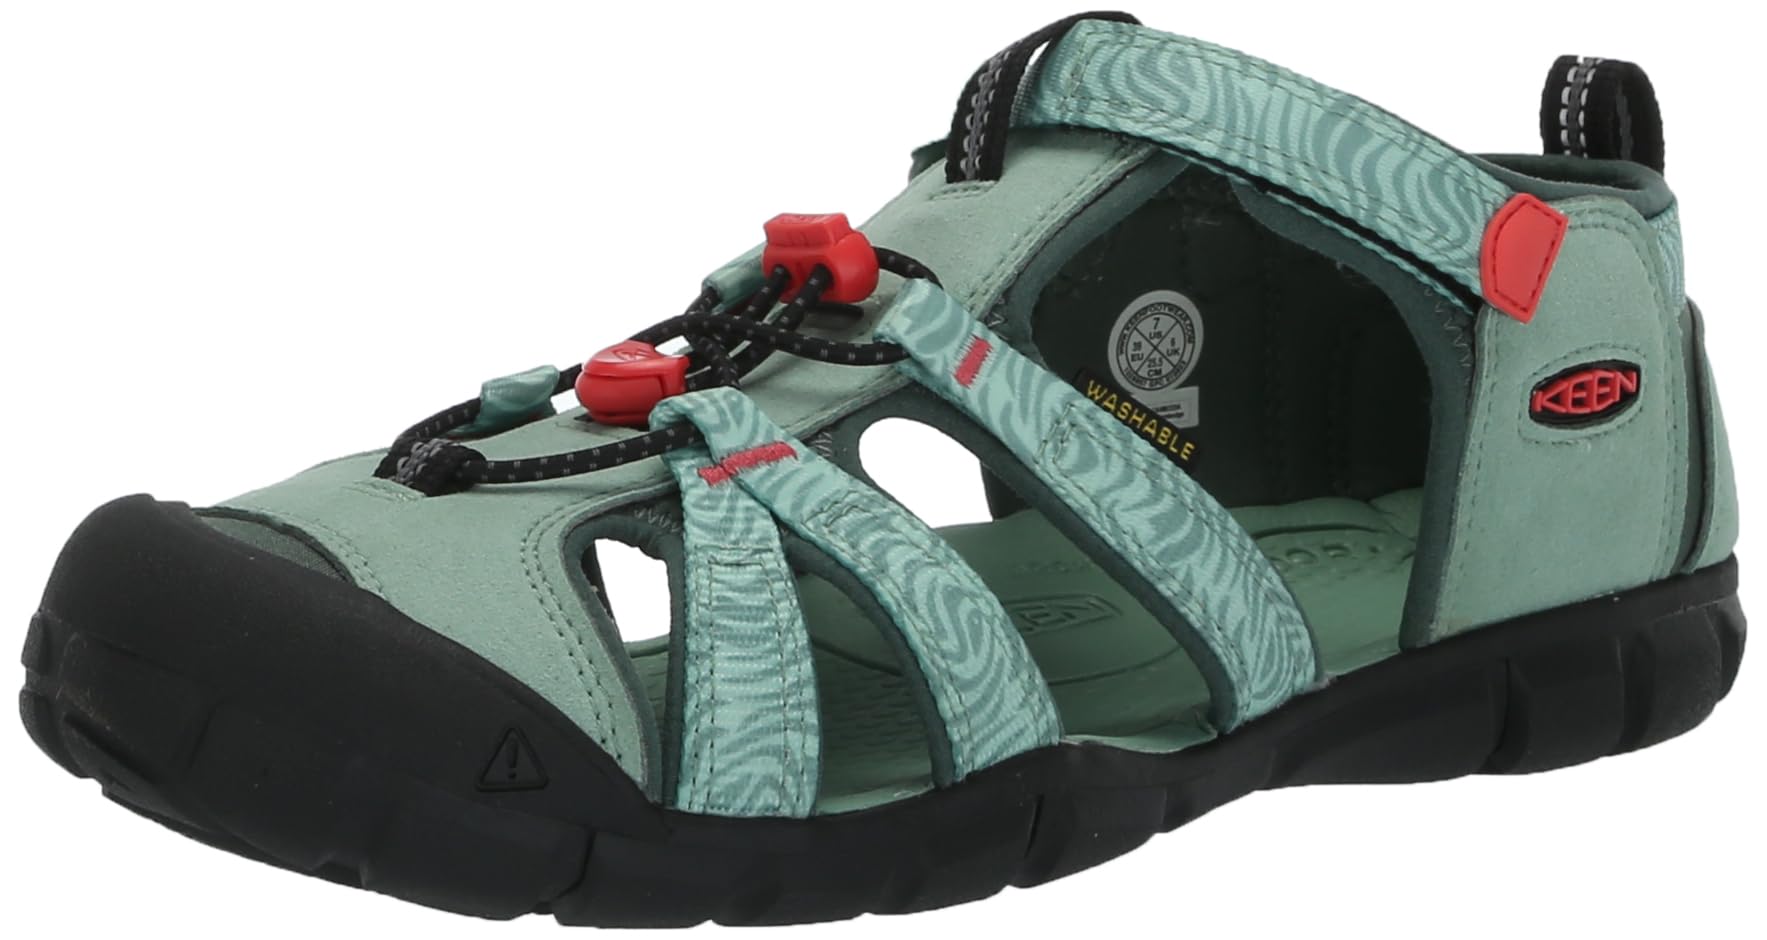 KEEN Kids Seacamp 2 CNX Closed Toe Sandals, Granite Green/Cayenne, 6 US Unisex Toddler